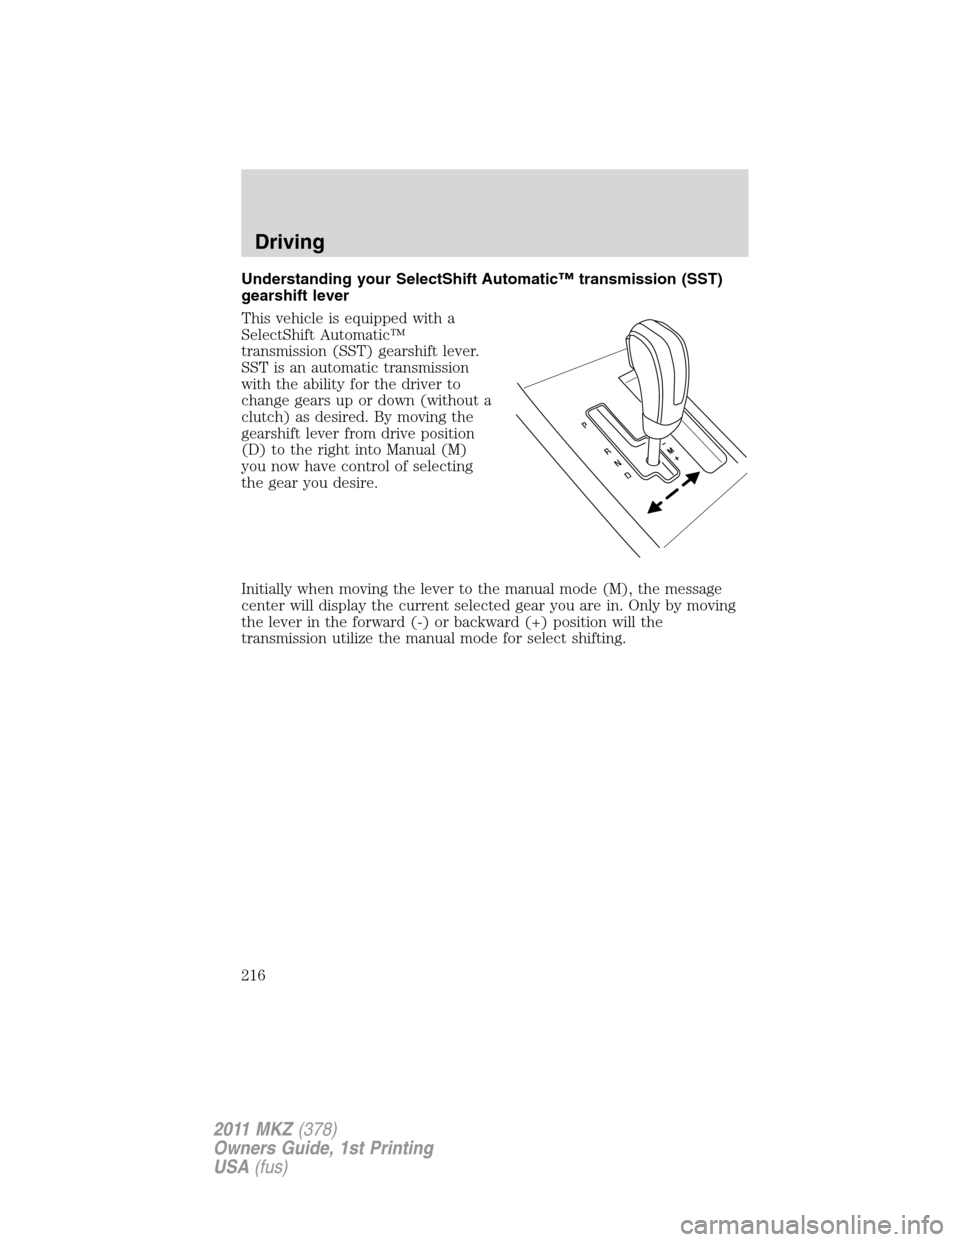 LINCOLN MKZ 2011  Owners Manual Understanding your SelectShift Automatic™ transmission (SST)
gearshift lever
This vehicle is equipped with a
SelectShift Automatic™
transmission (SST) gearshift lever.
SST is an automatic transmis